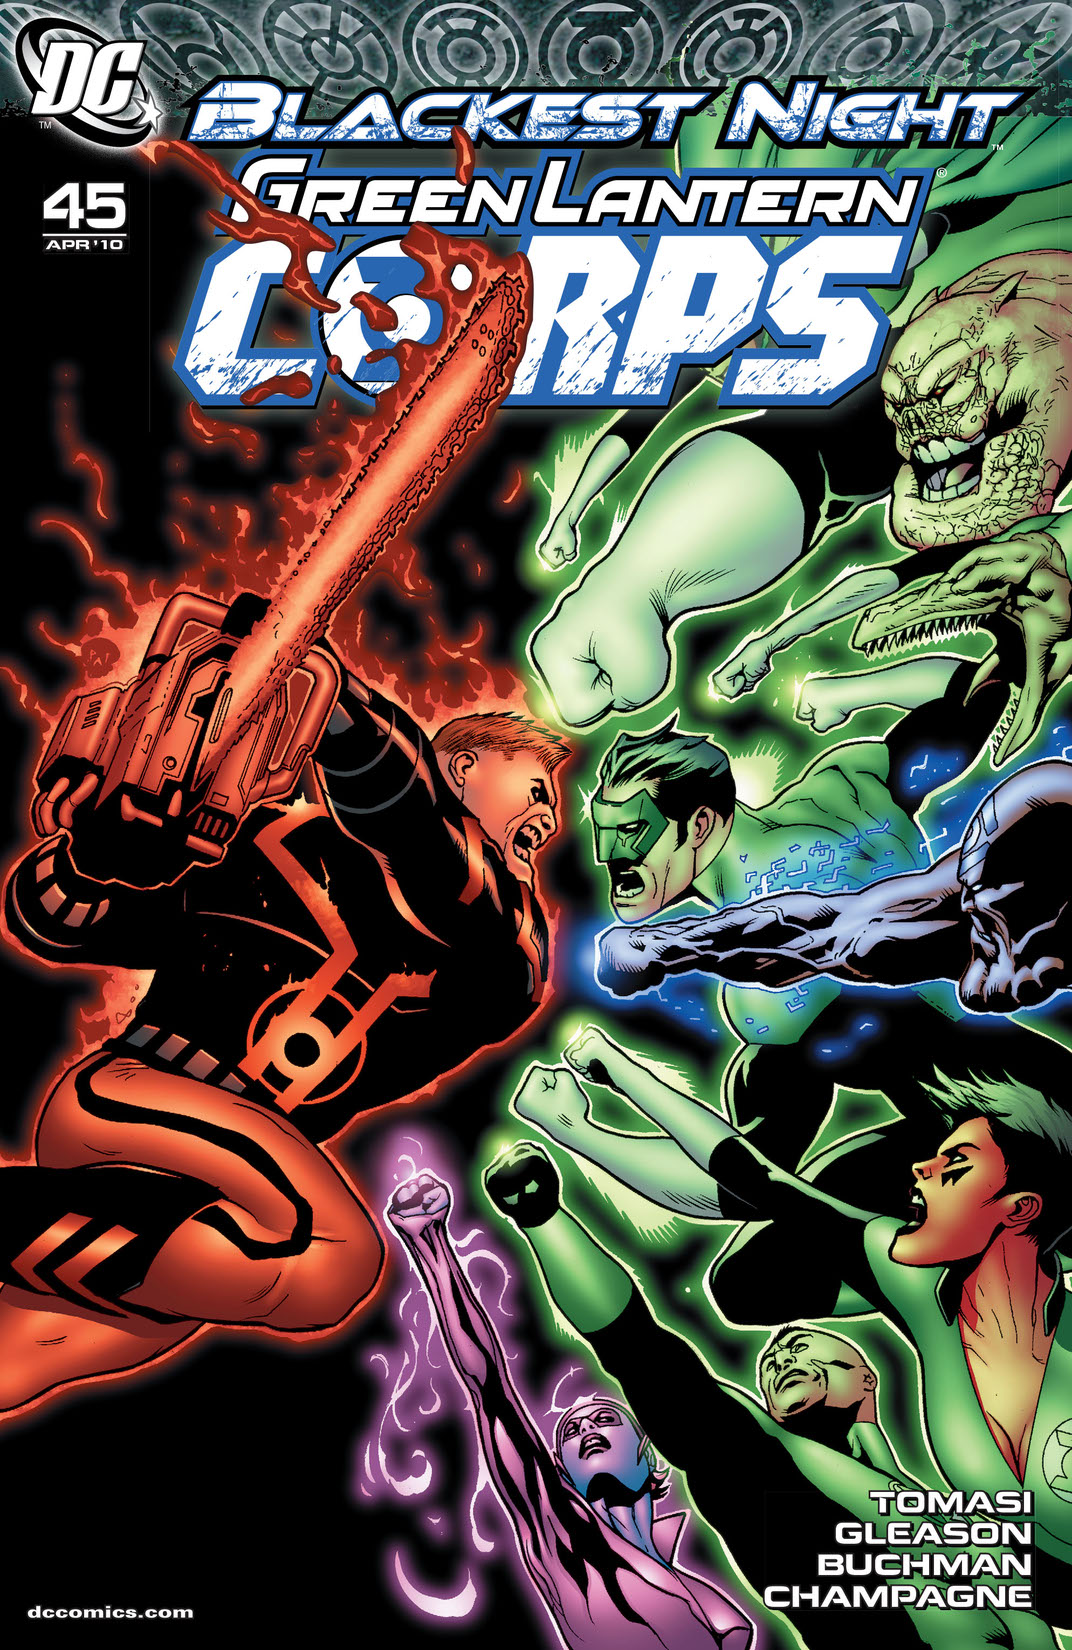 Green Lantern Corps (2006-) #45 preview images